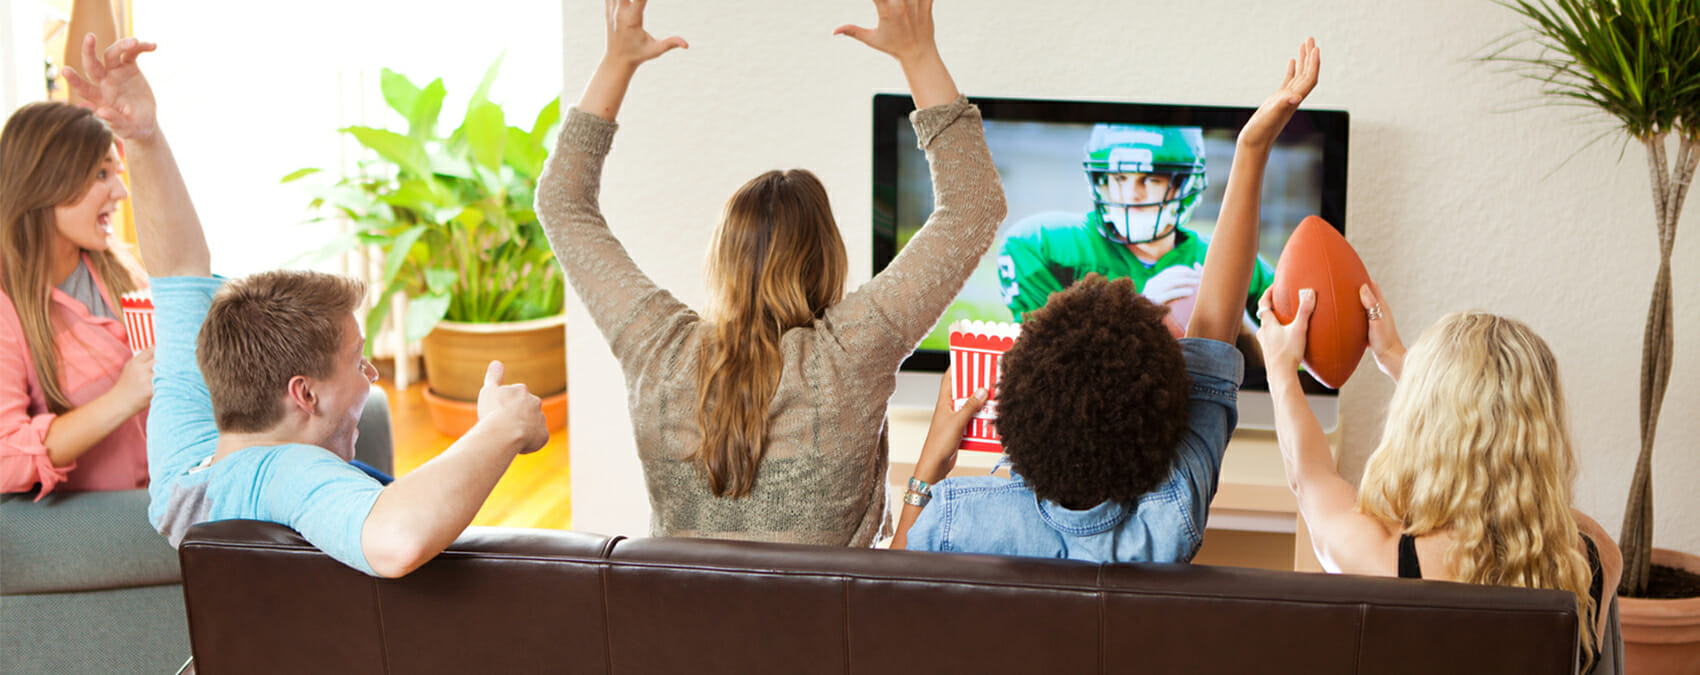 Men and women on a couch cheering on a football game on the TV